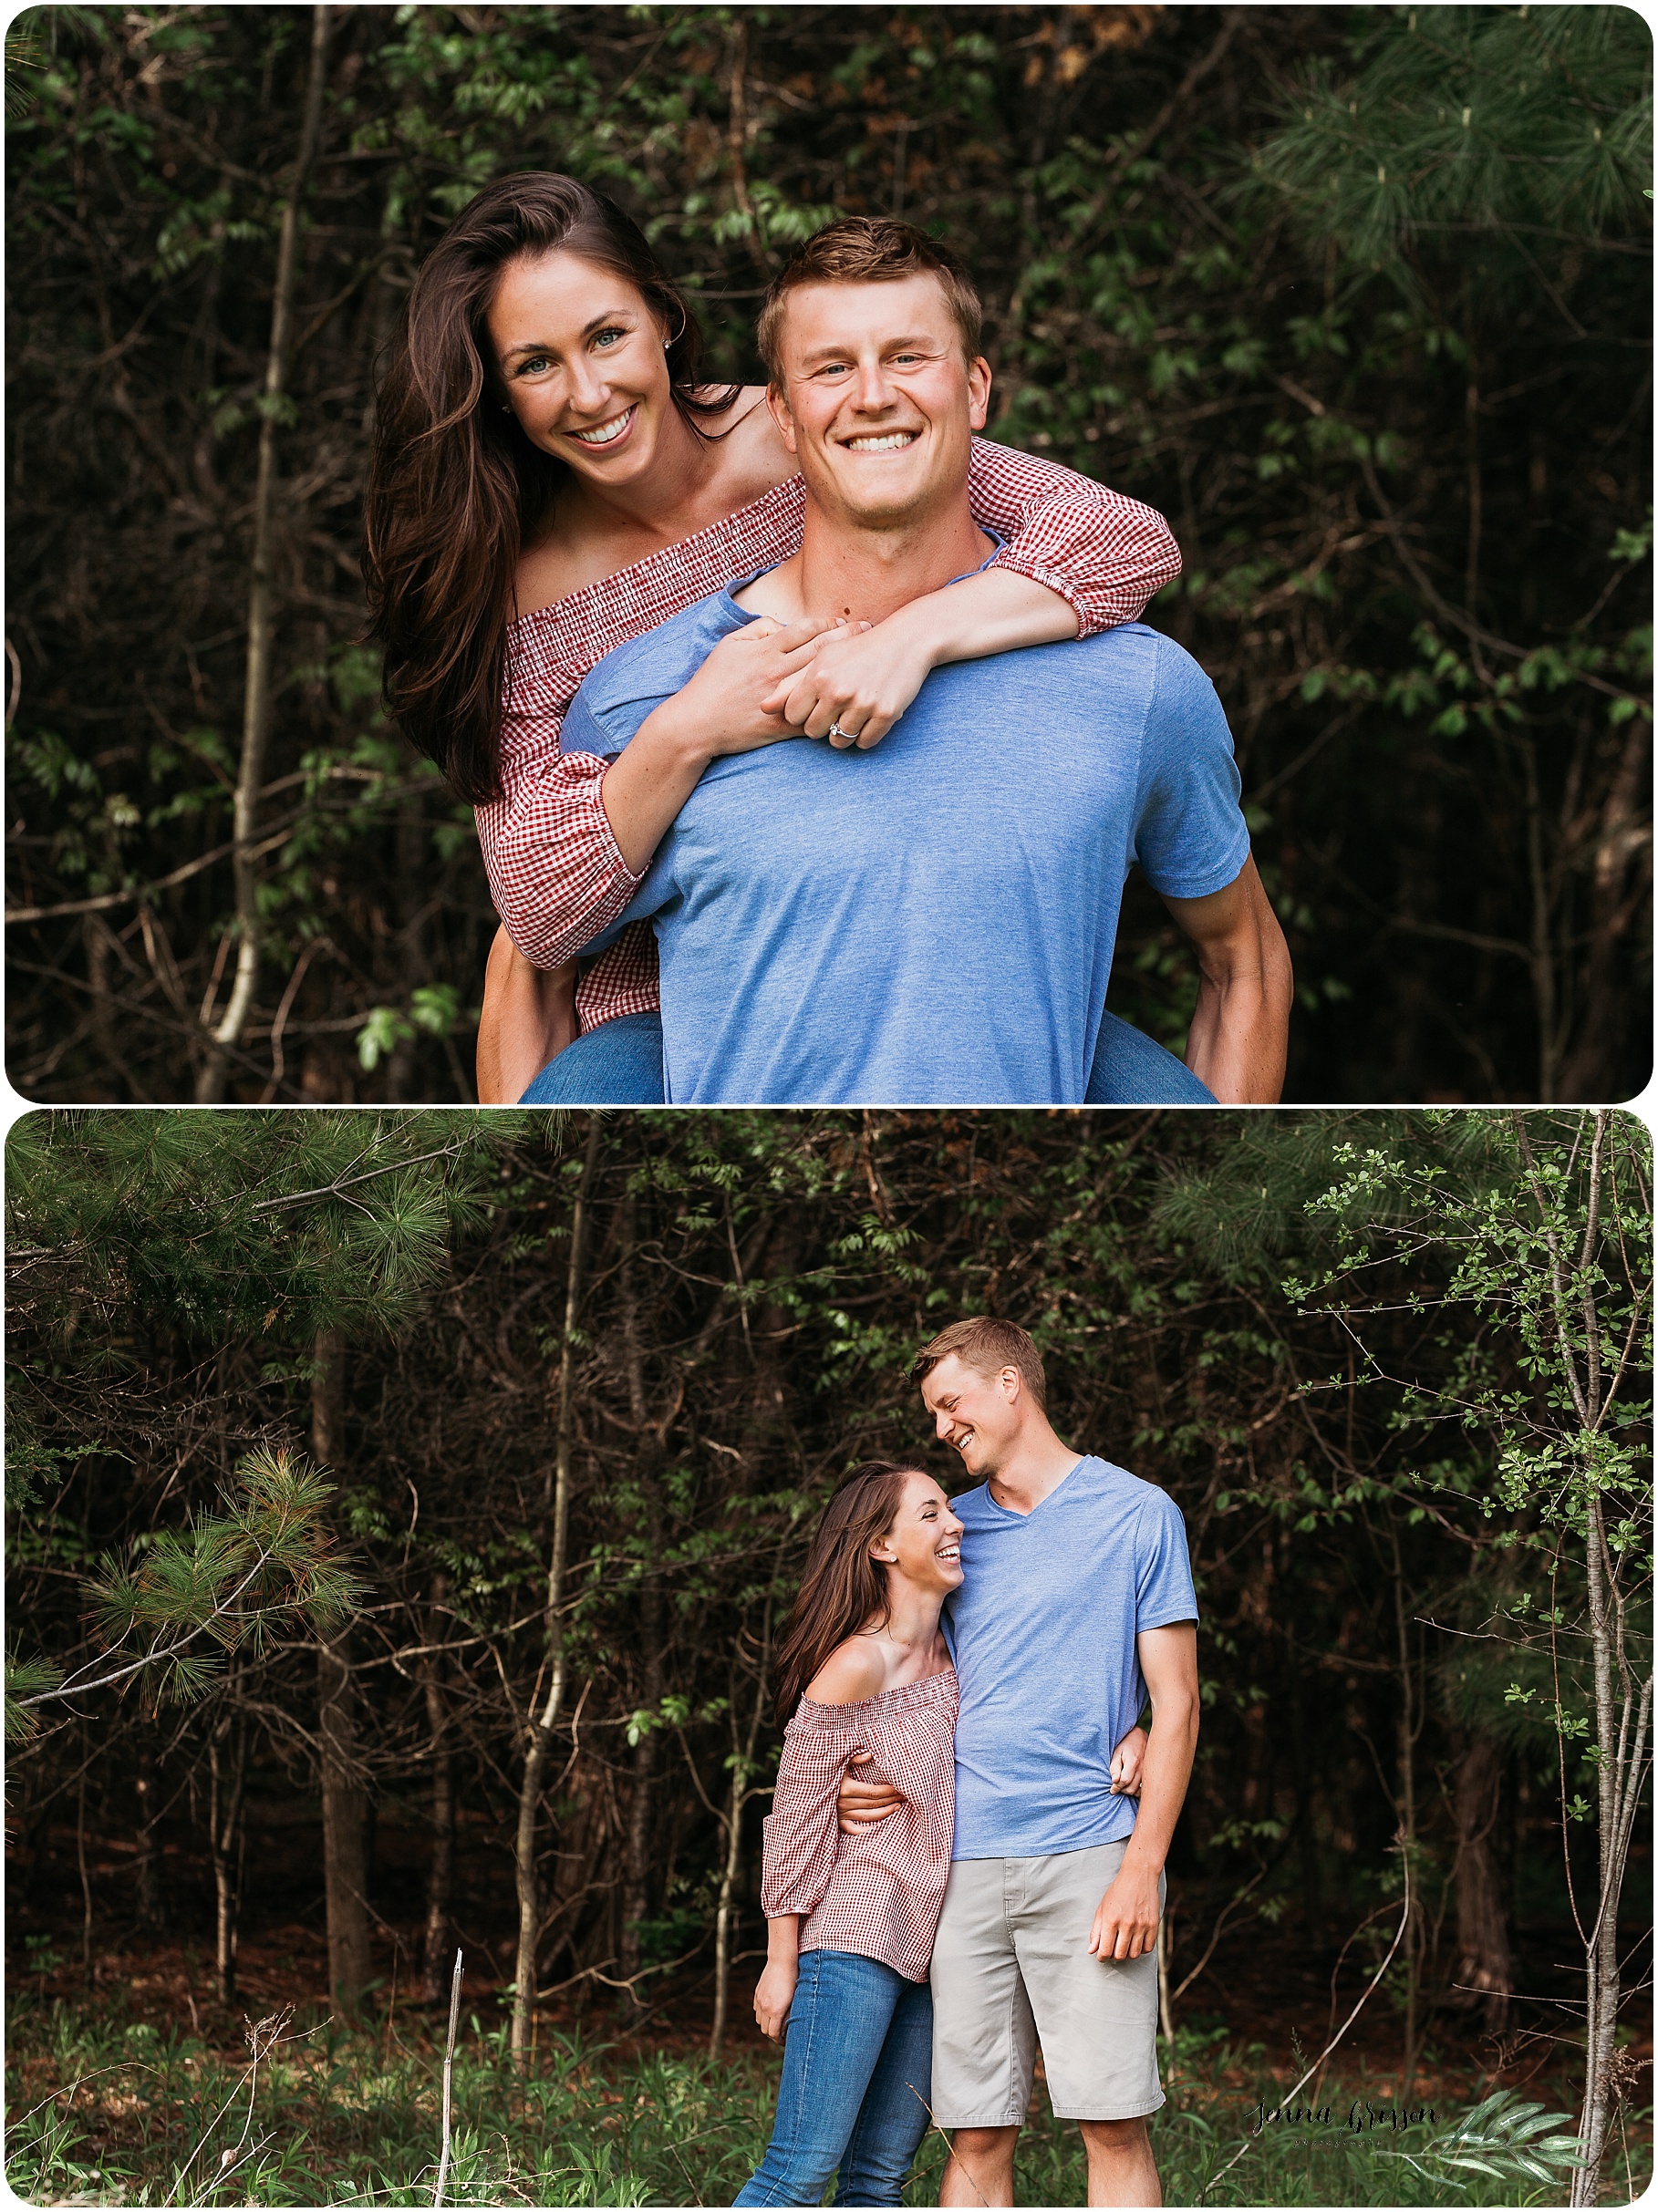 Vermont In Home Engagement Session 5 - Jenna Brisson Photography